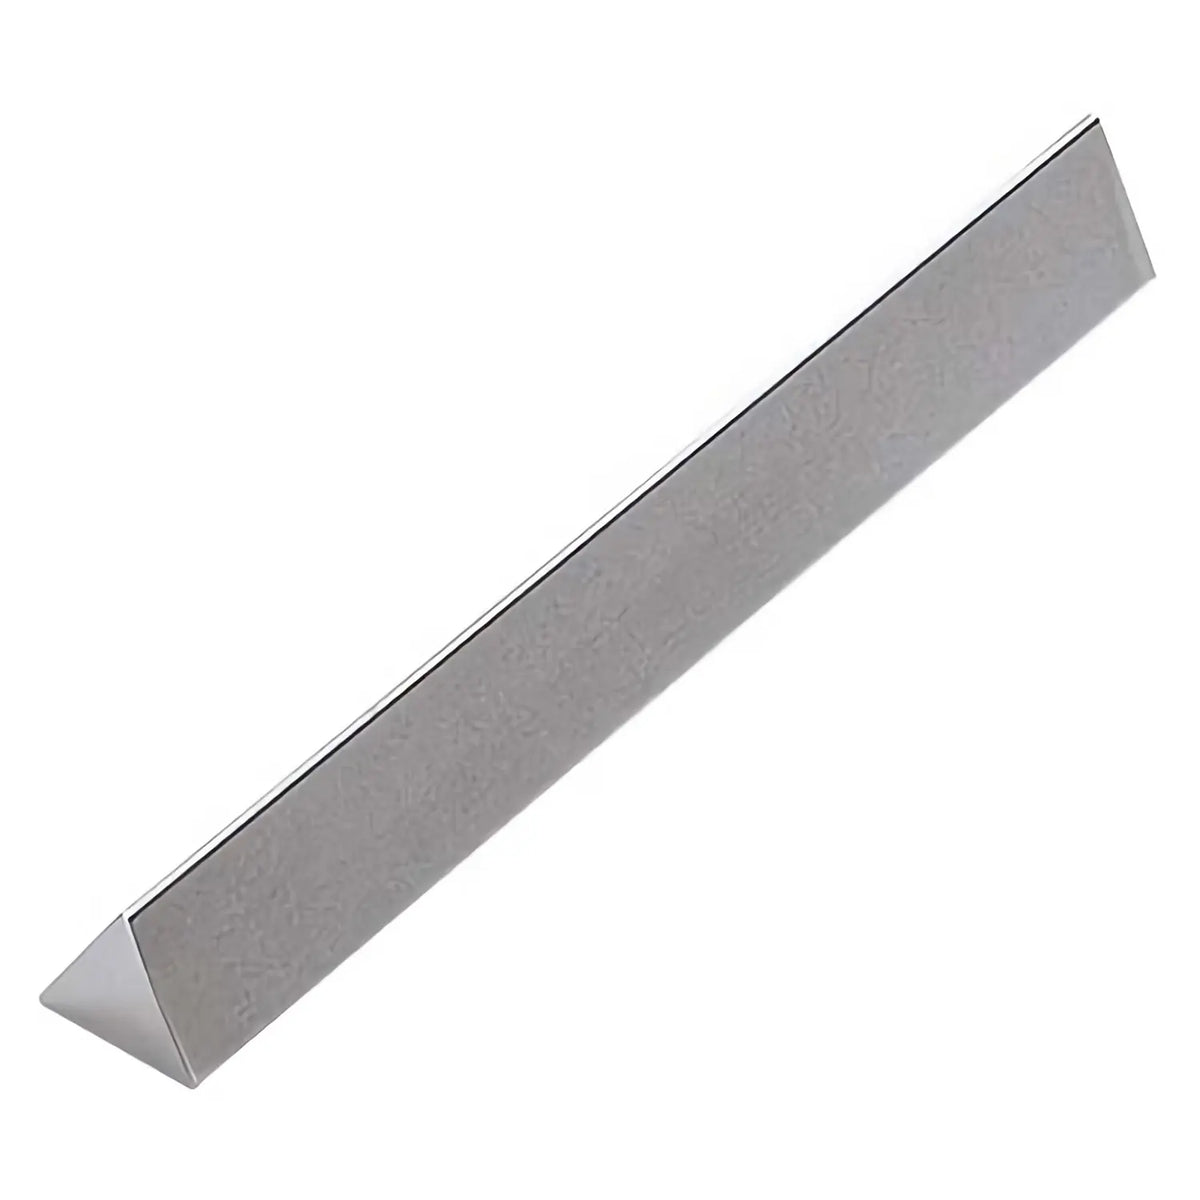 EBM Stainless Steel Cutlery Rest Triangle